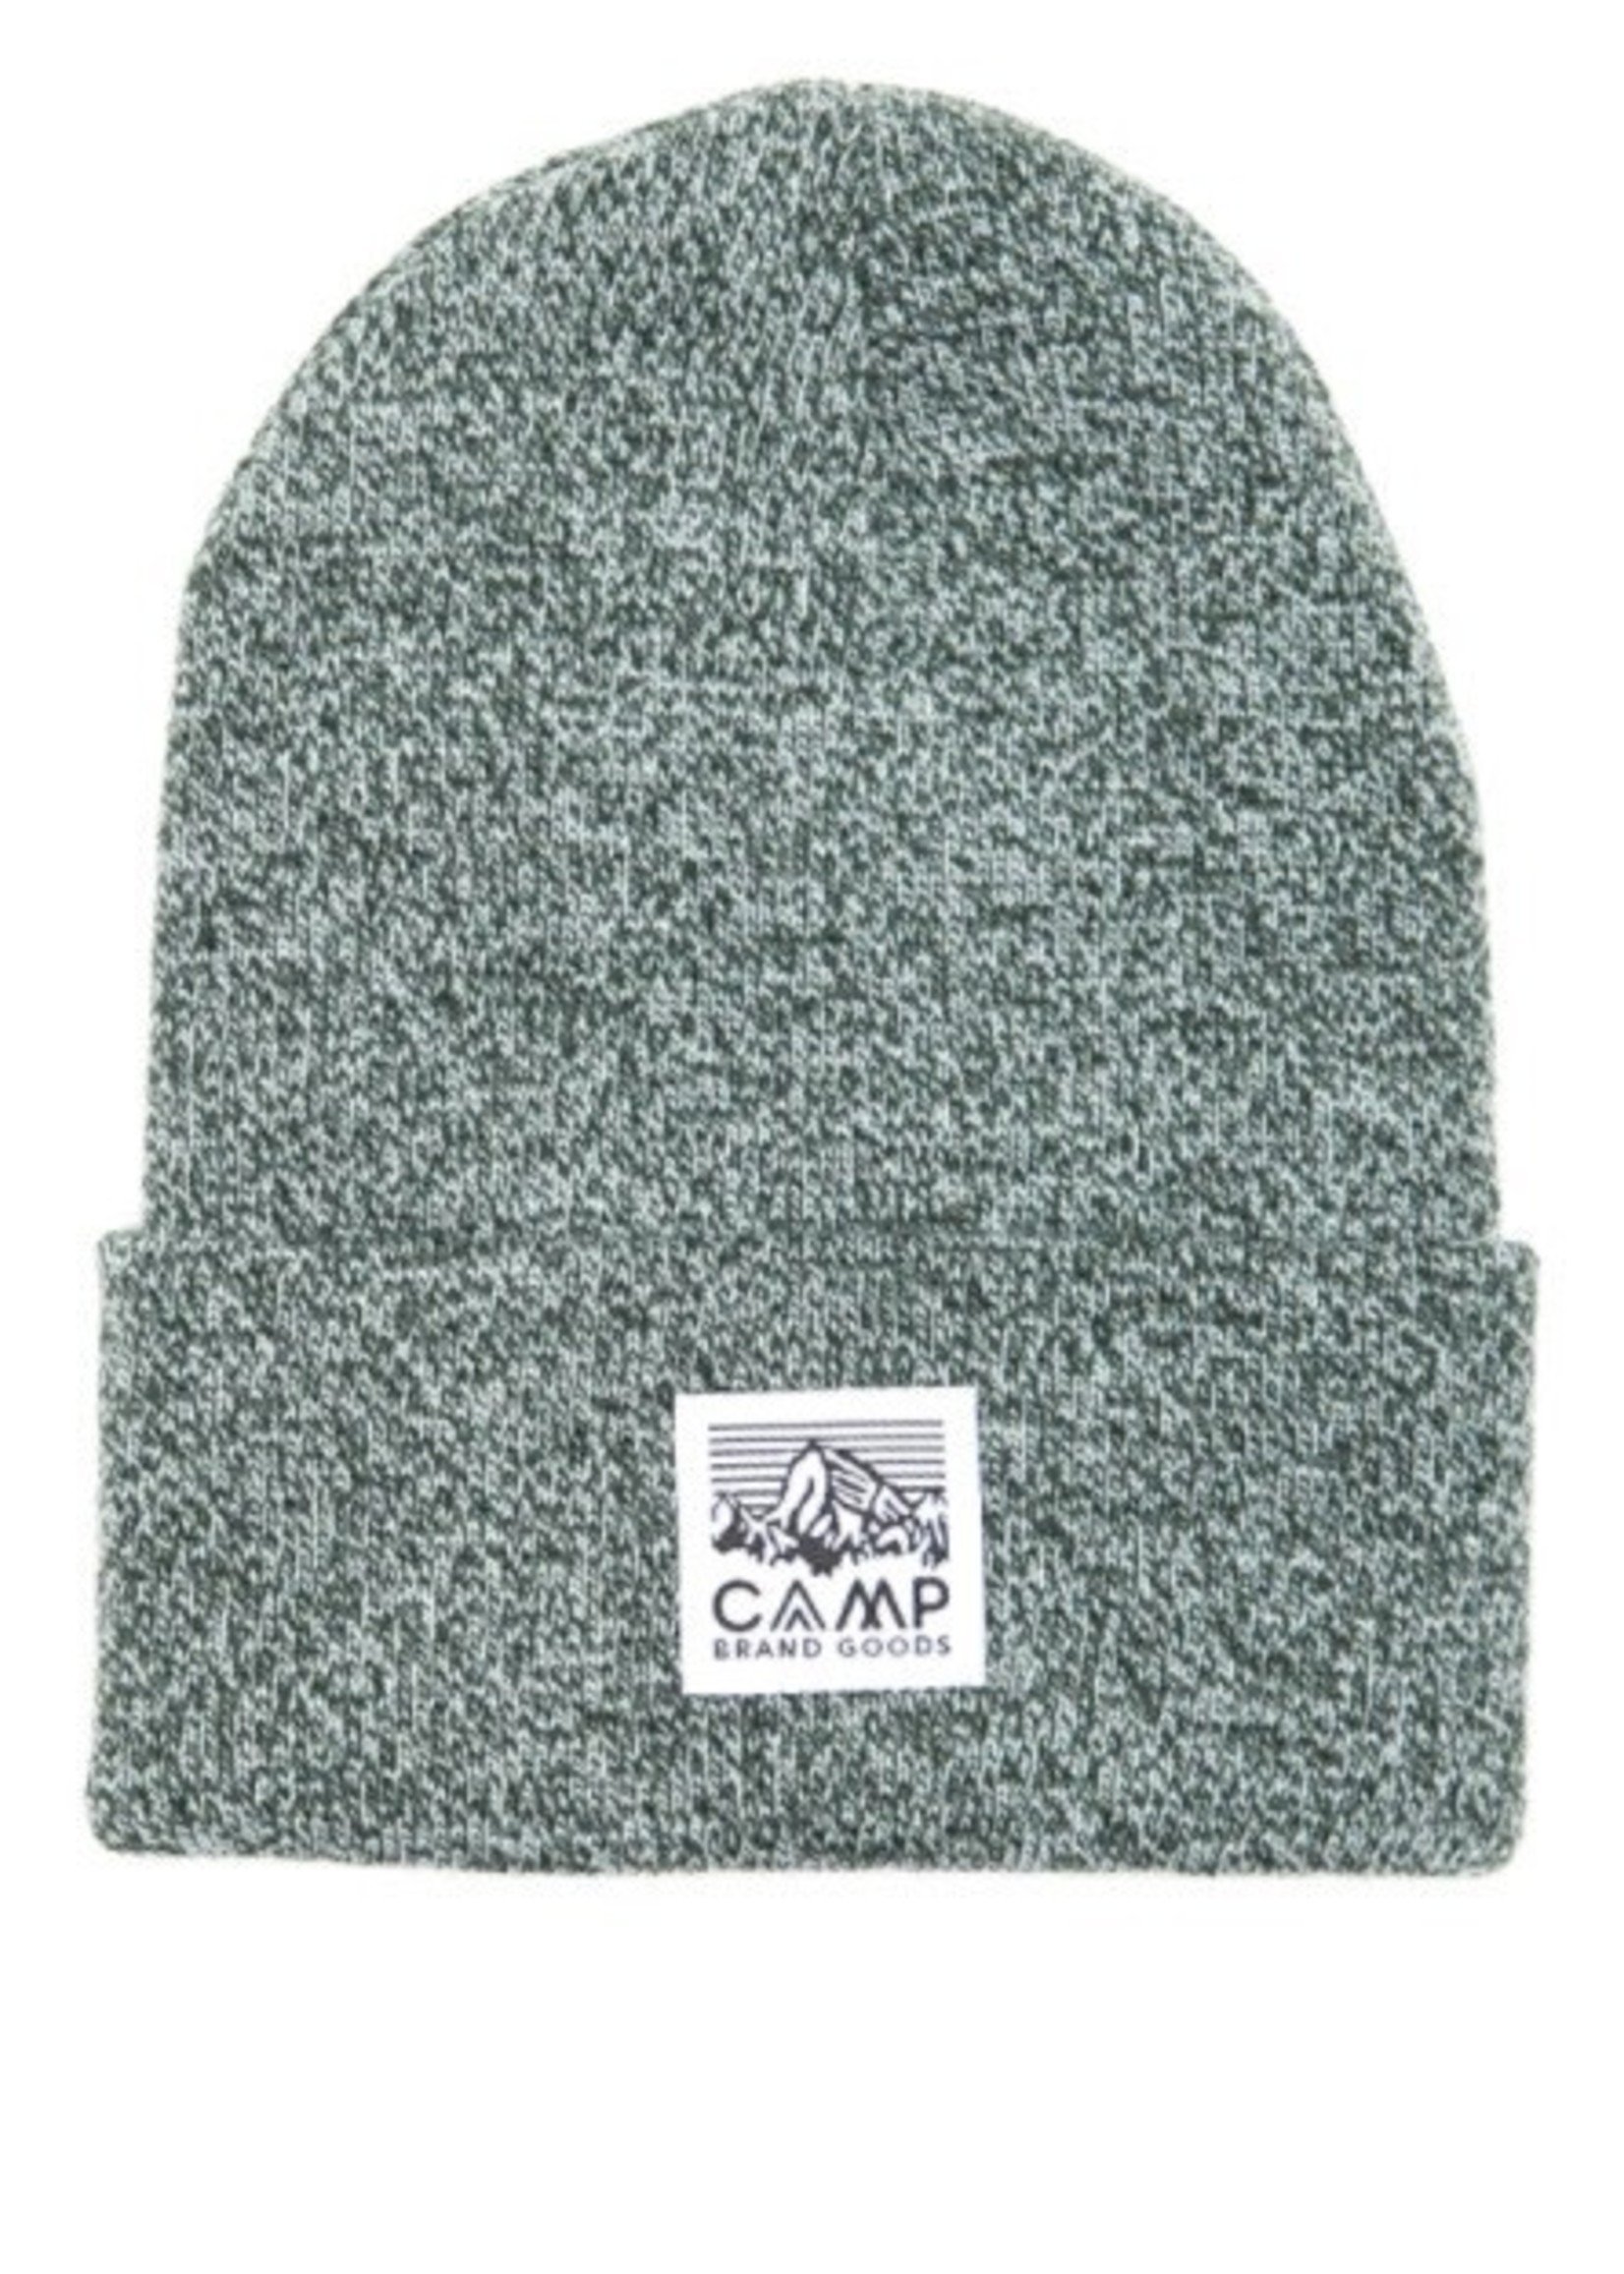 Camp Brand Goods Tuques Camp Brand Goods